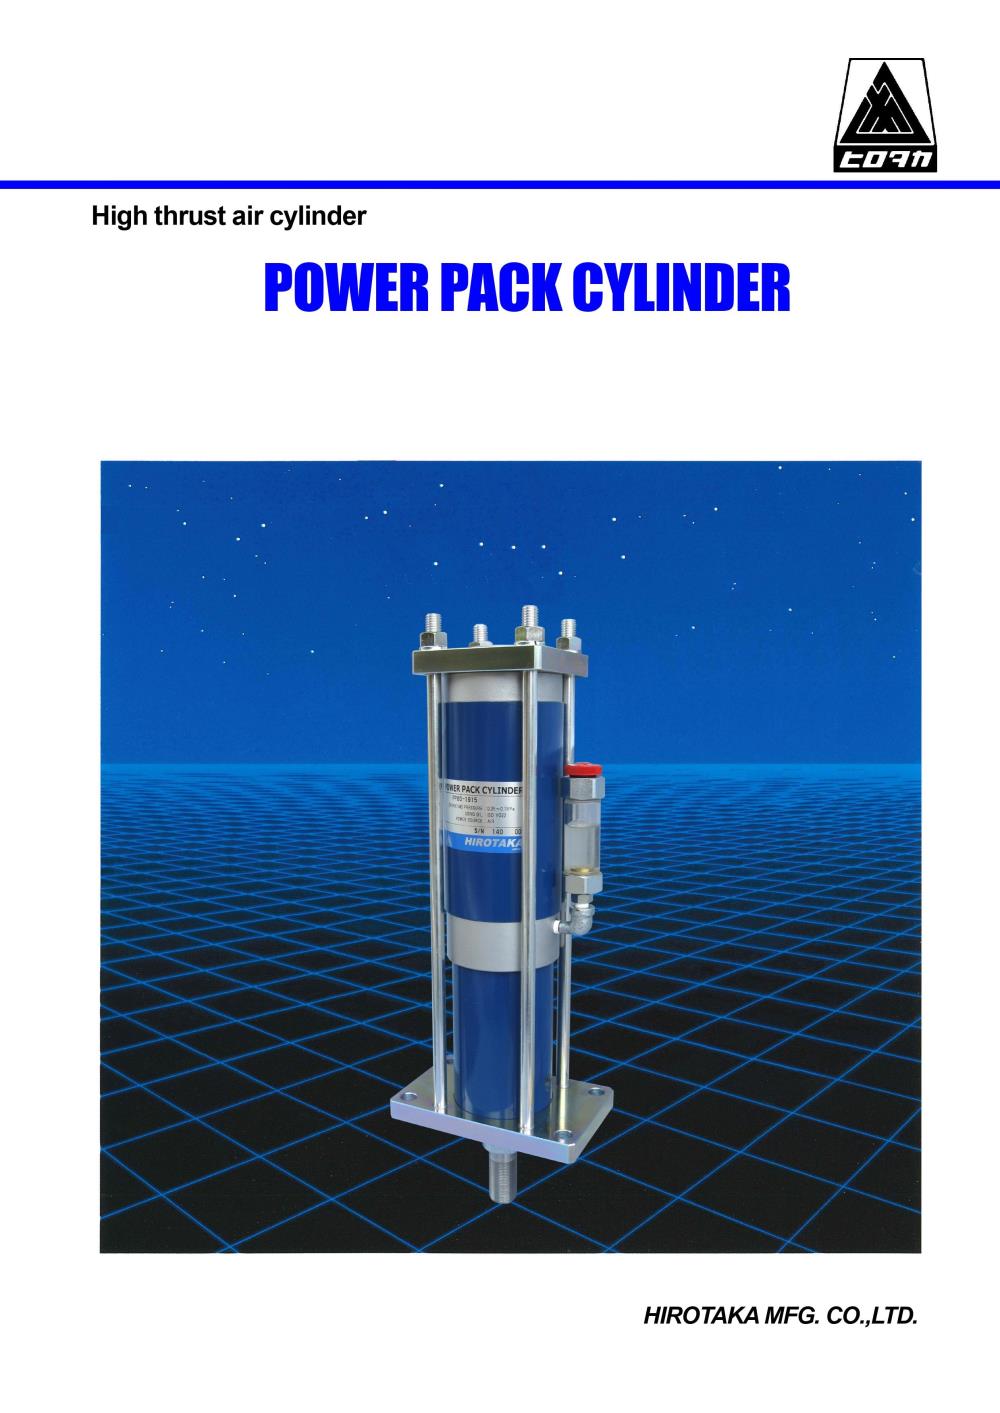 HIROTAKA Power Pack Cylinder PP100 Series,PP100, PP100-2135, PP100-2727, PP100-3620, PP100-5514, PP100-7908, HIROTAKA, Power Pack Cylinder, Cylinder, Power Cylinder,HIROTAKA,Machinery and Process Equipment/Equipment and Supplies/Cylinders